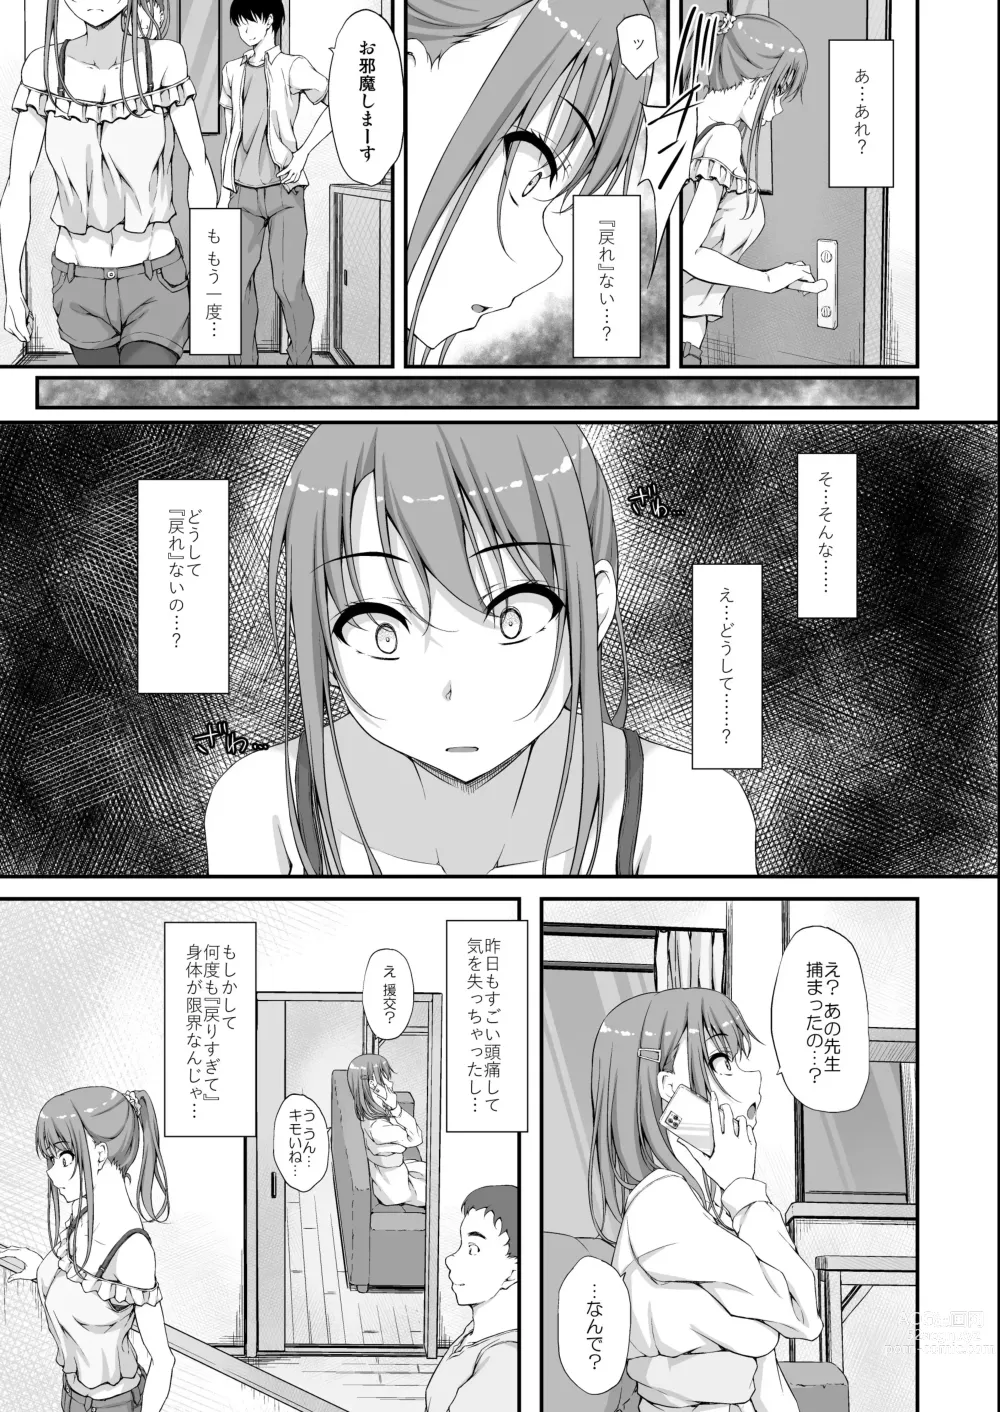 Page 9 of doujinshi Re:Temptation 5